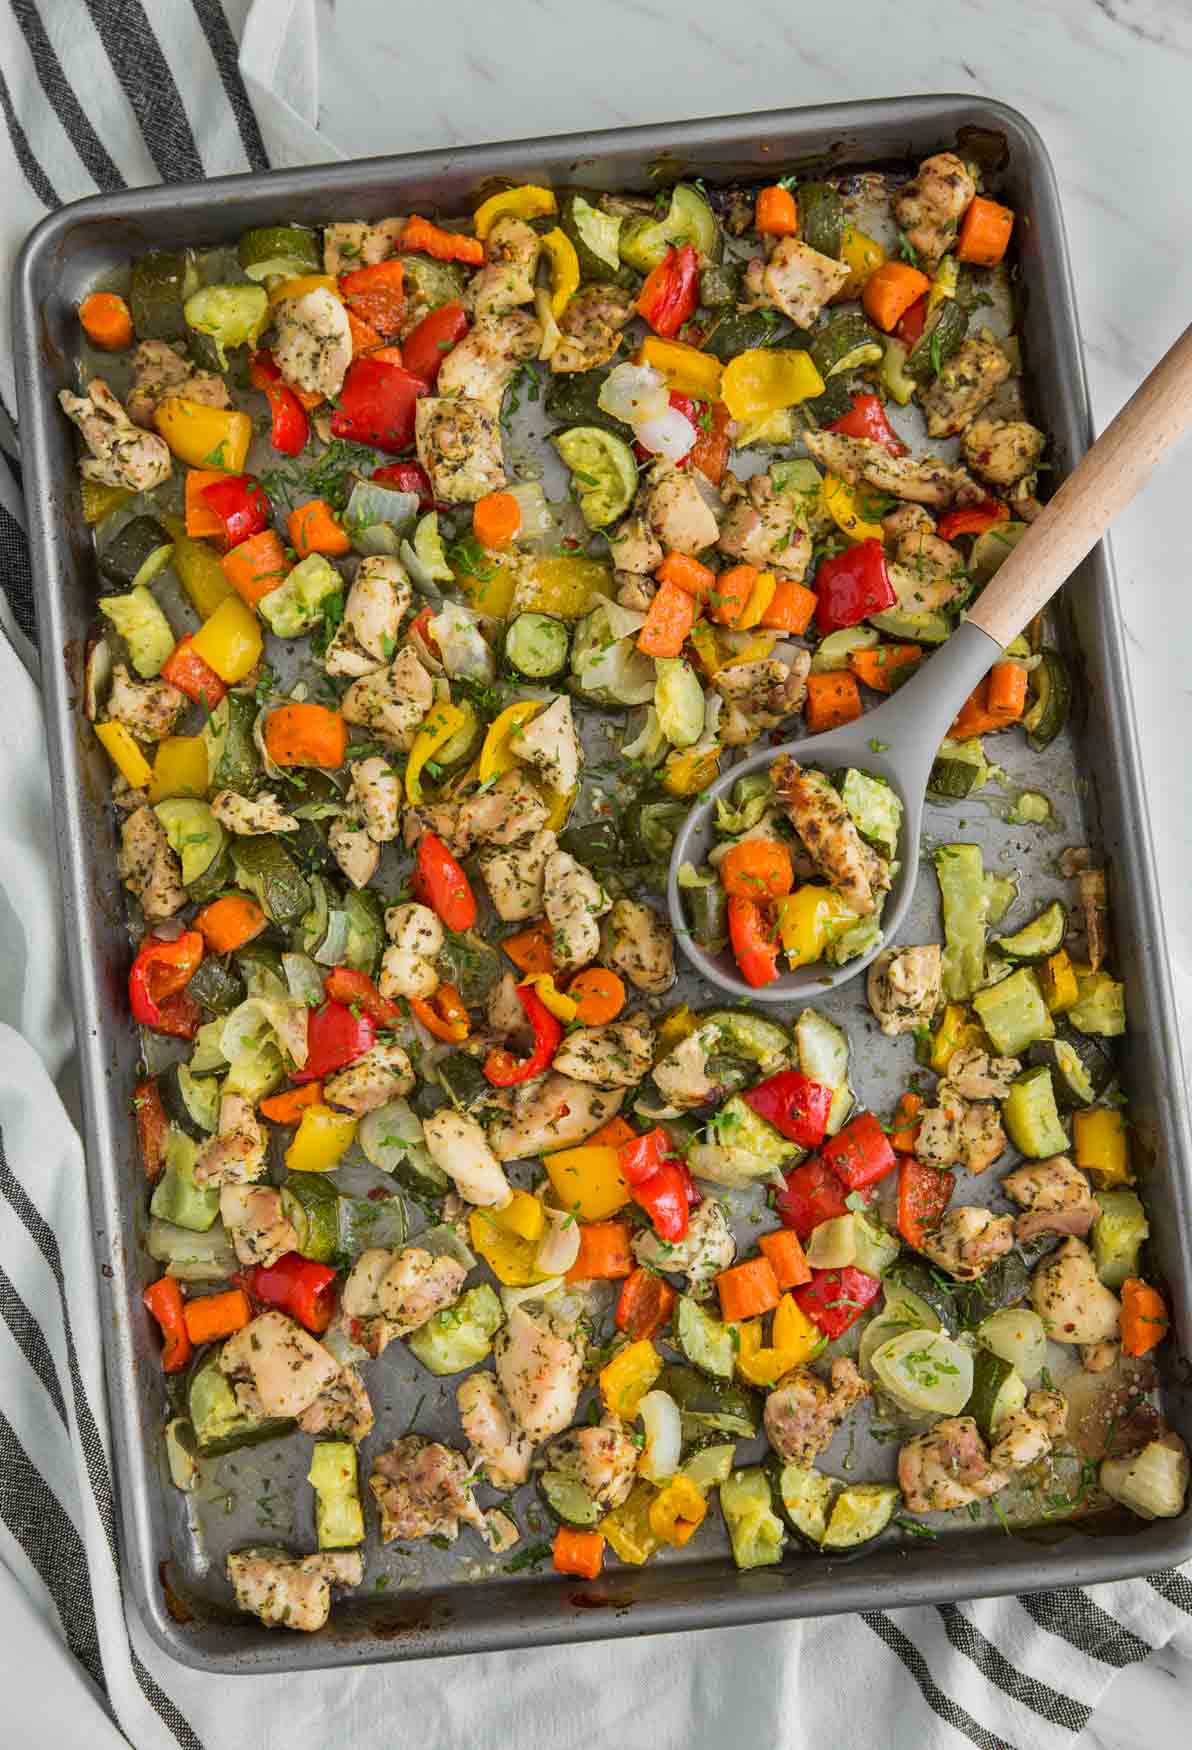 One-pan baked chicken and vegetables in a baking tray ready to serve